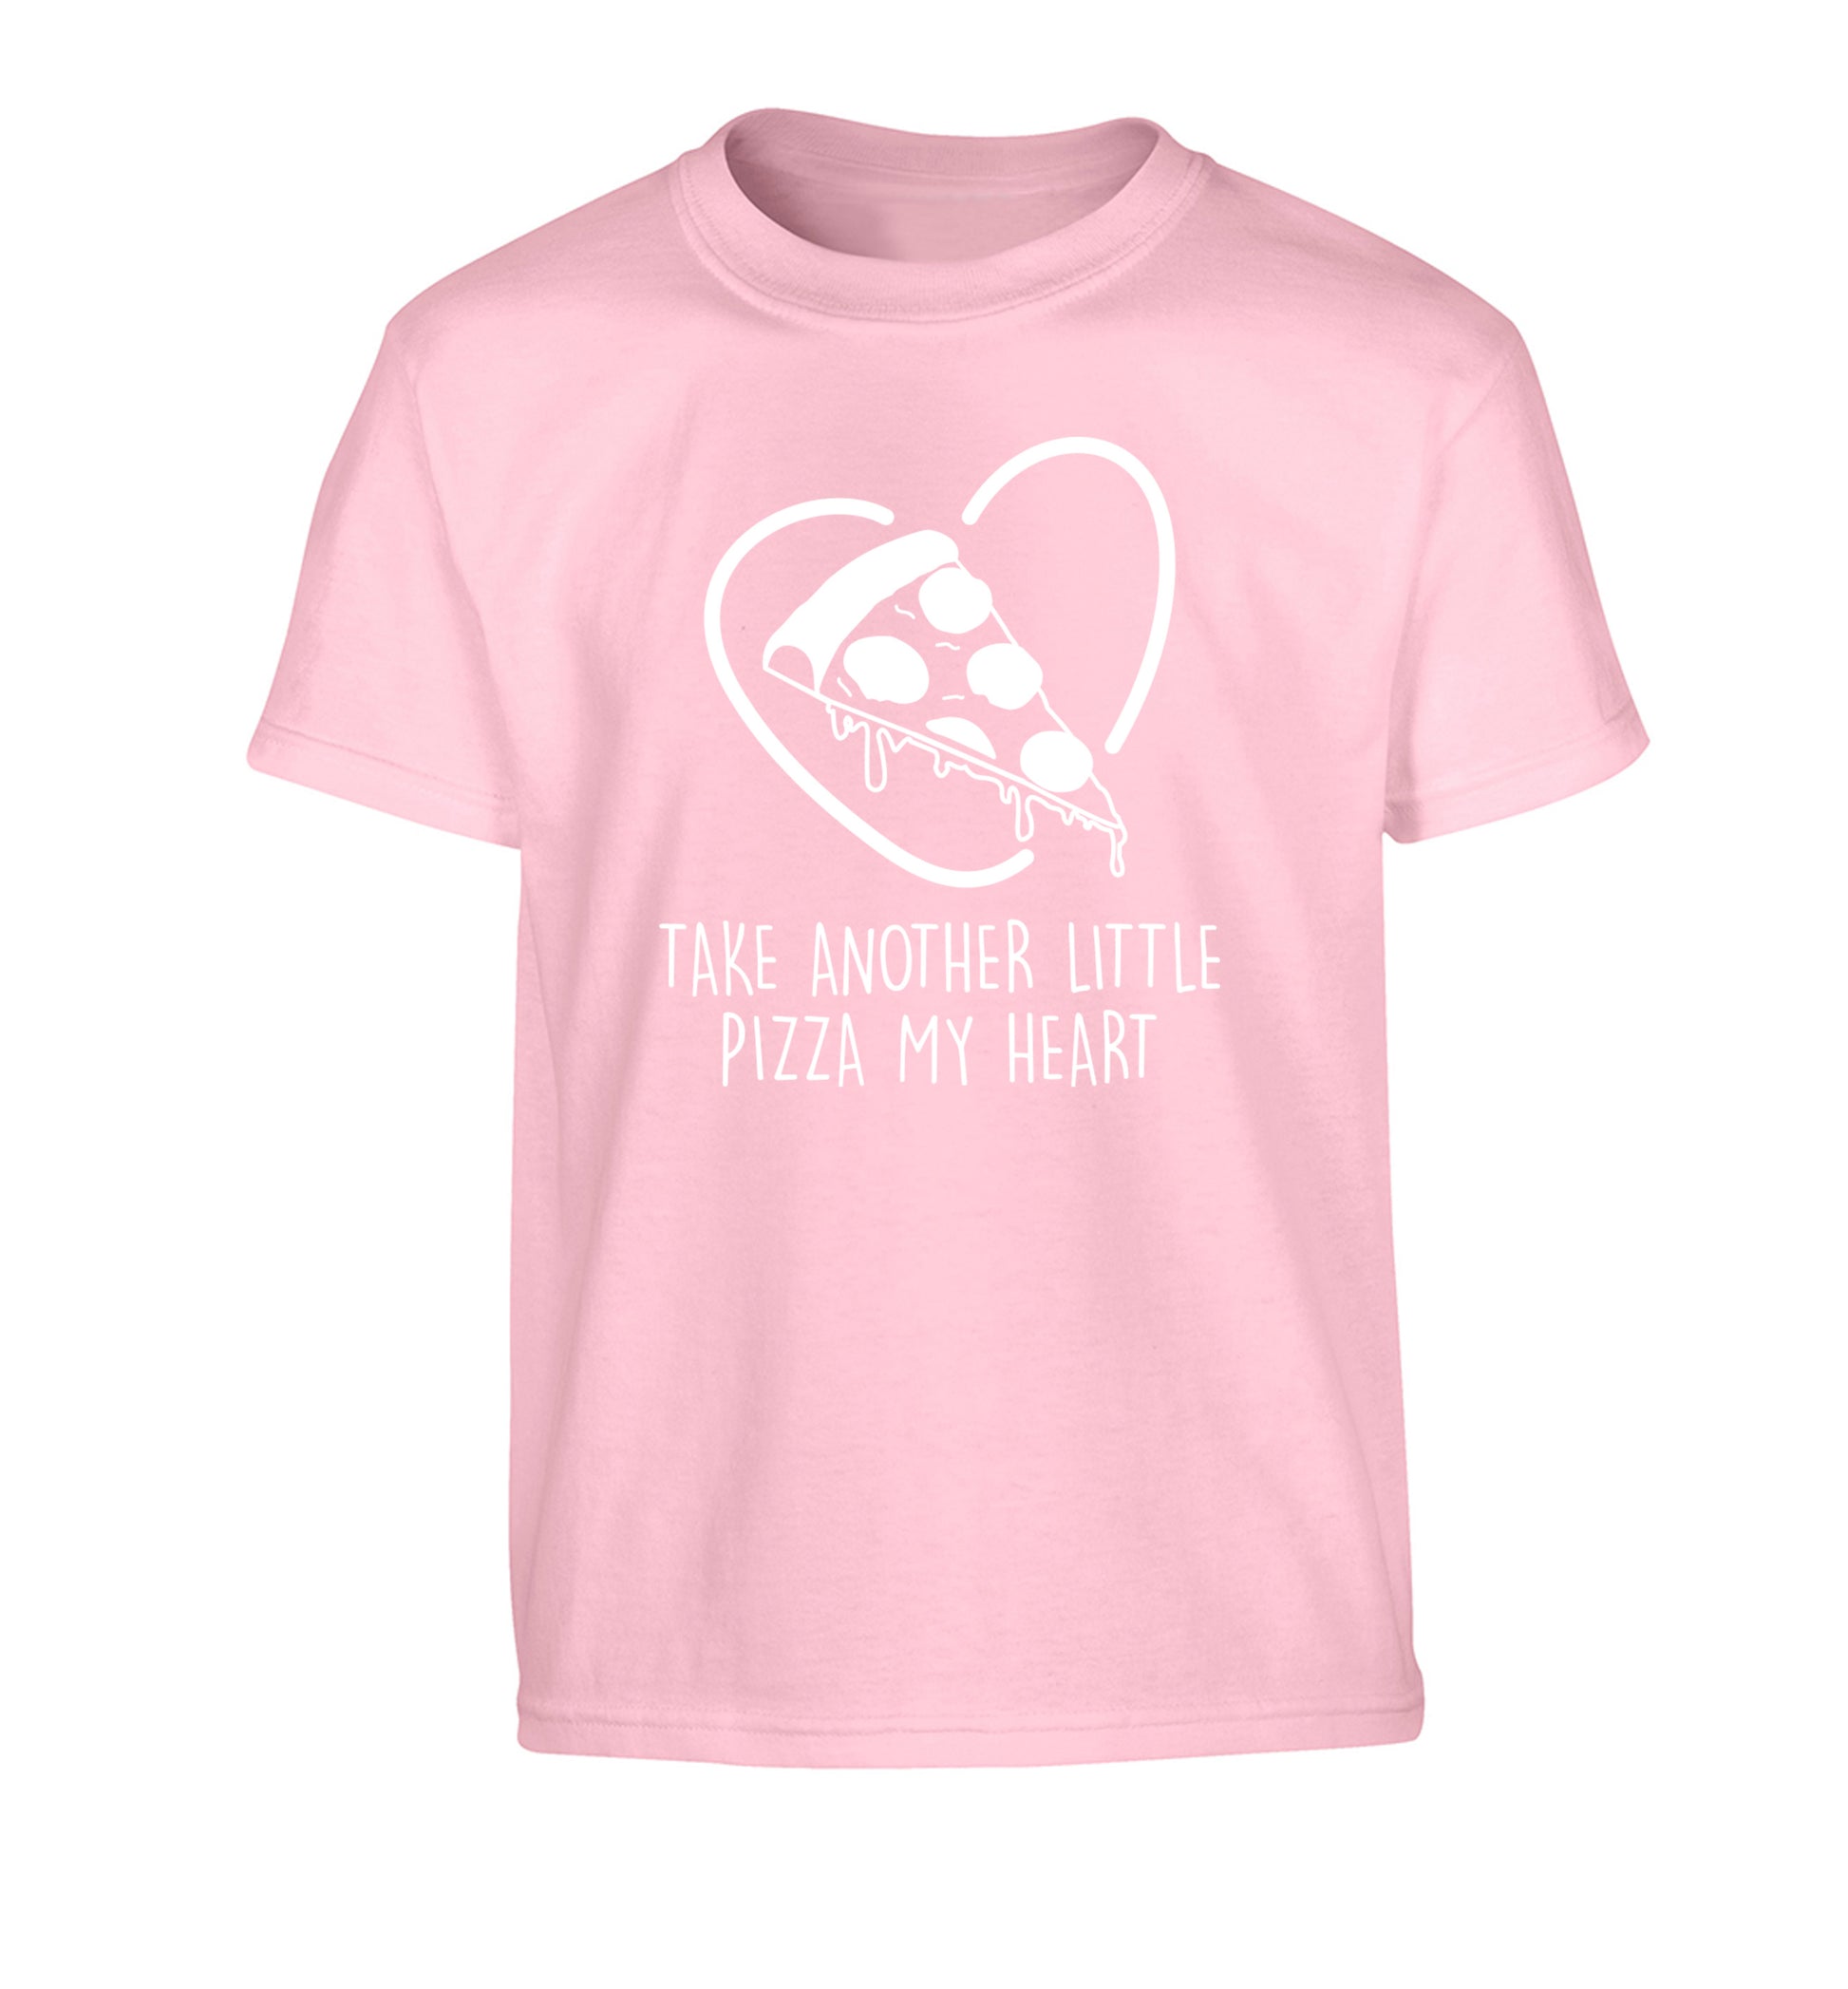 Take another little pizza my heart Children's light pink Tshirt 12-13 Years